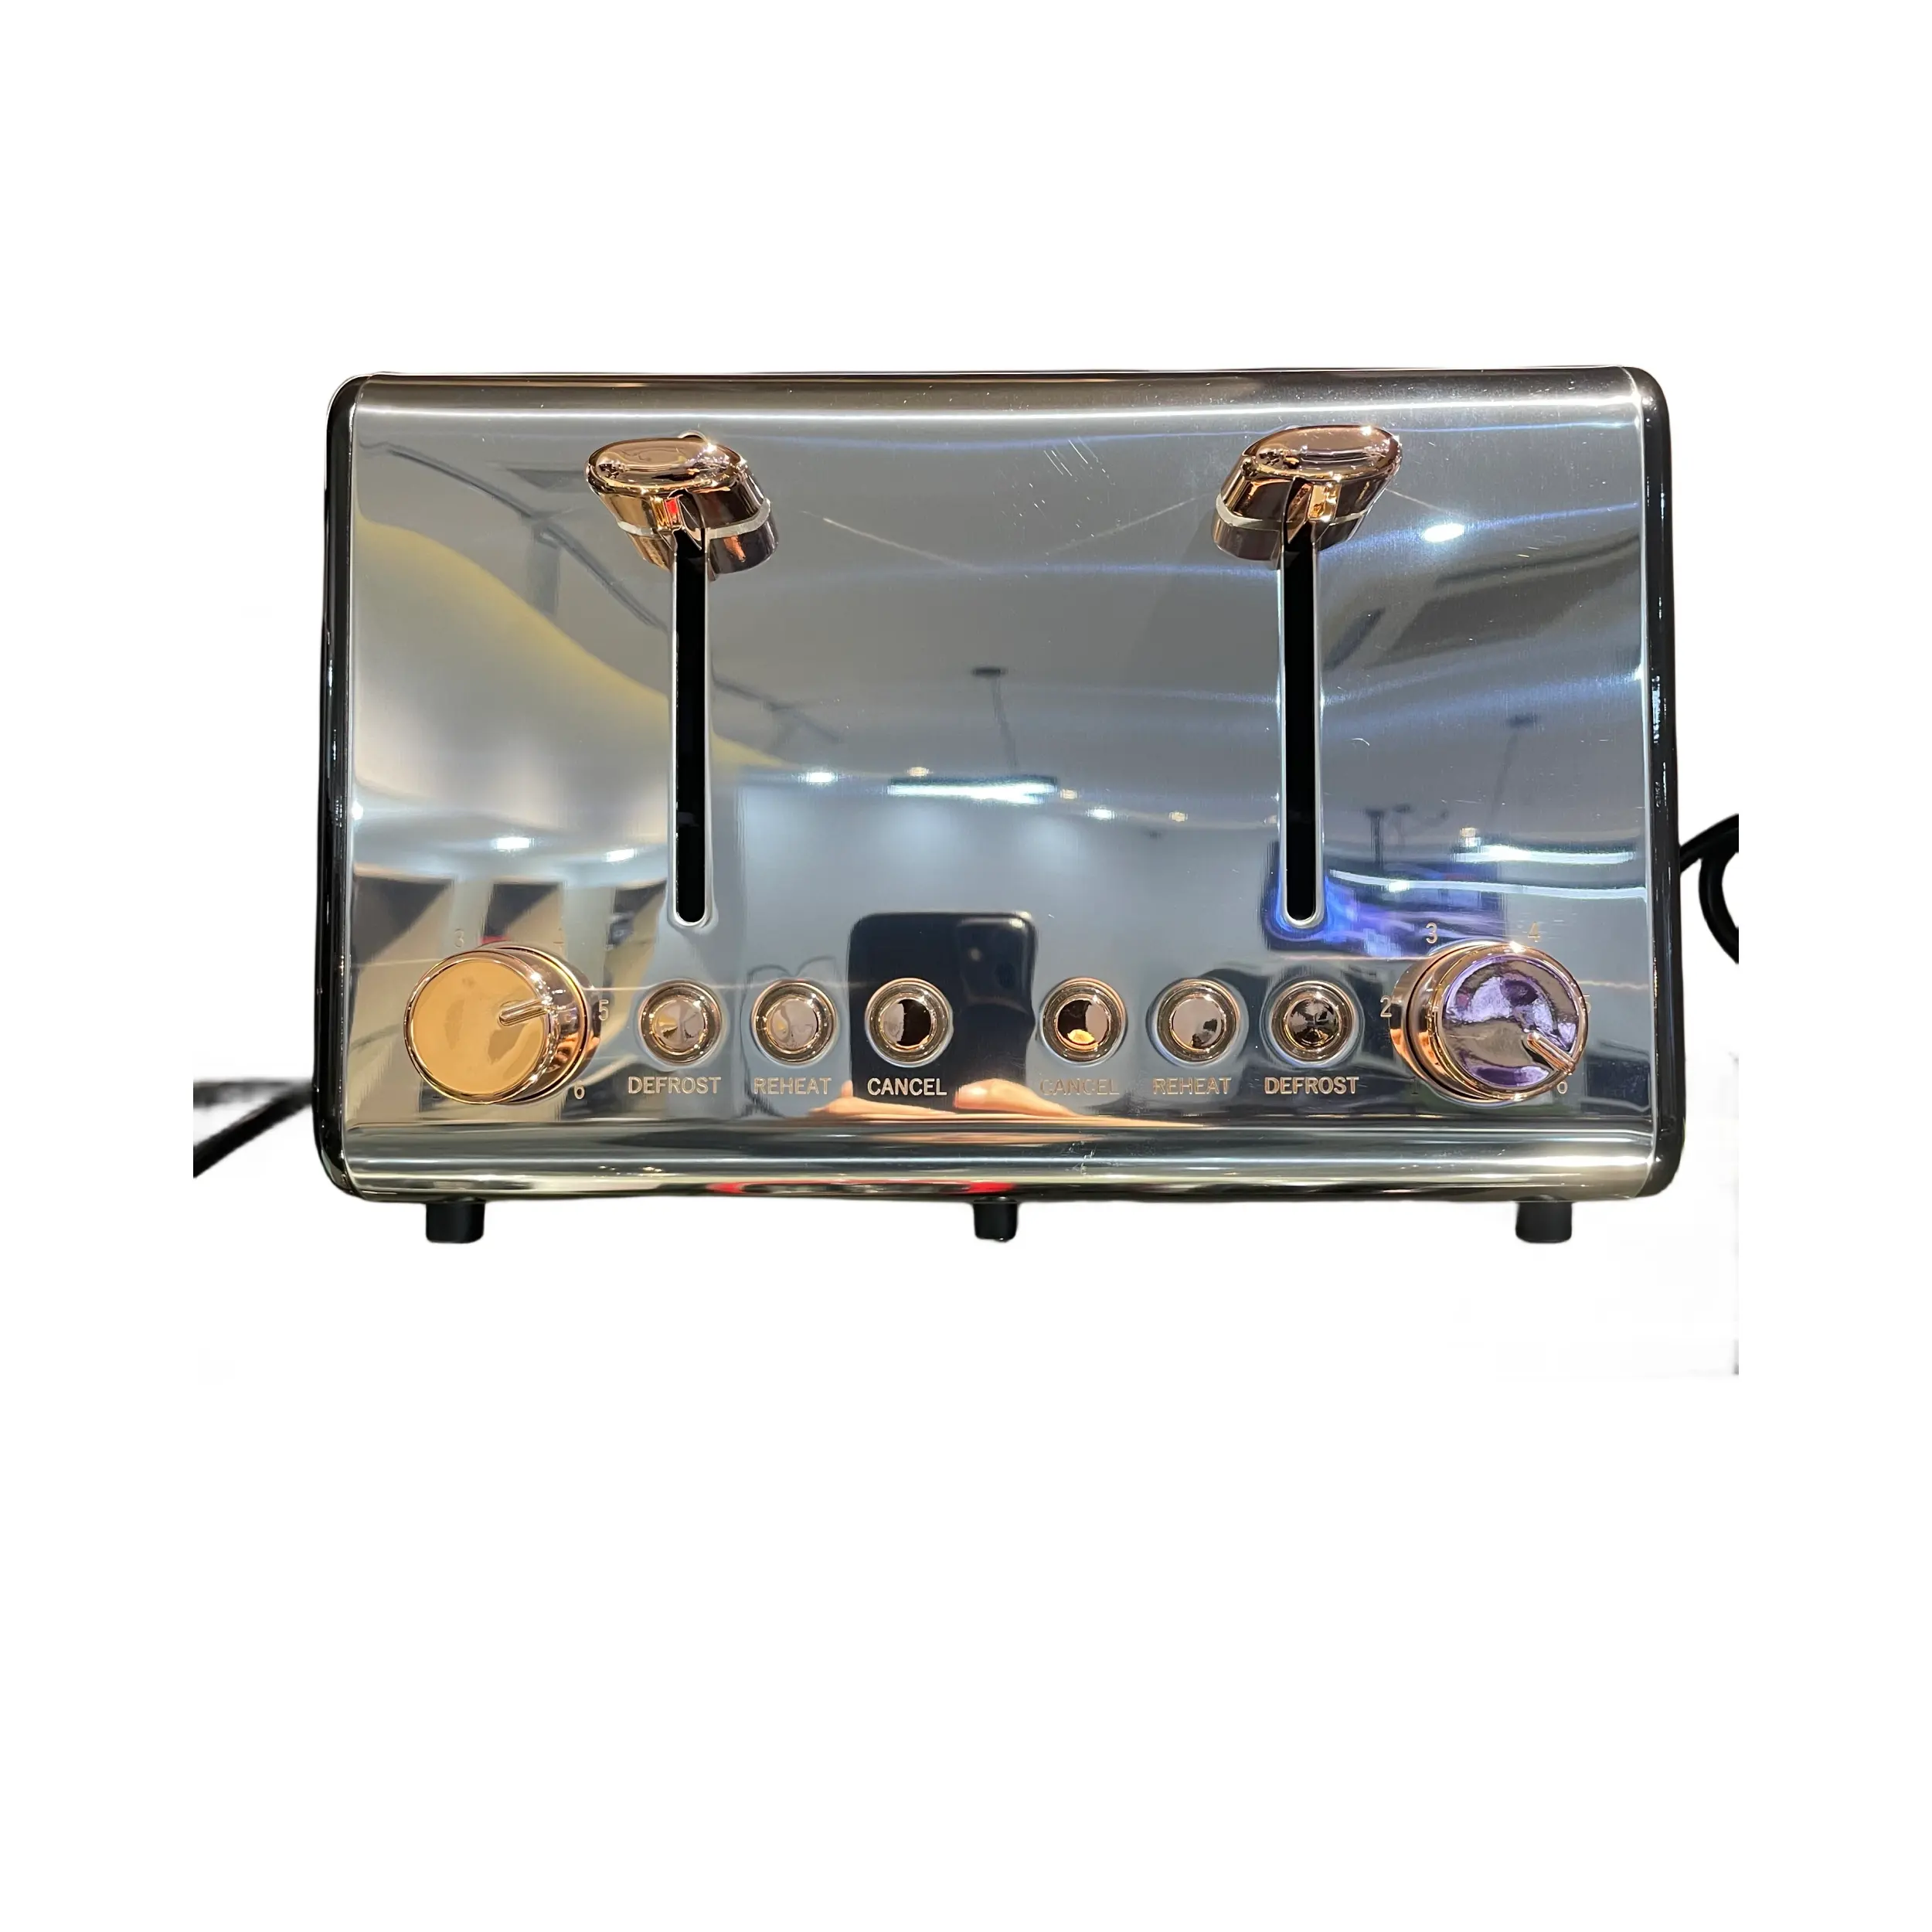 Retro 4 Slices Bread Toaster 6 Degree Browning Setting Stainless Steel with Spray Painting Tostadoras